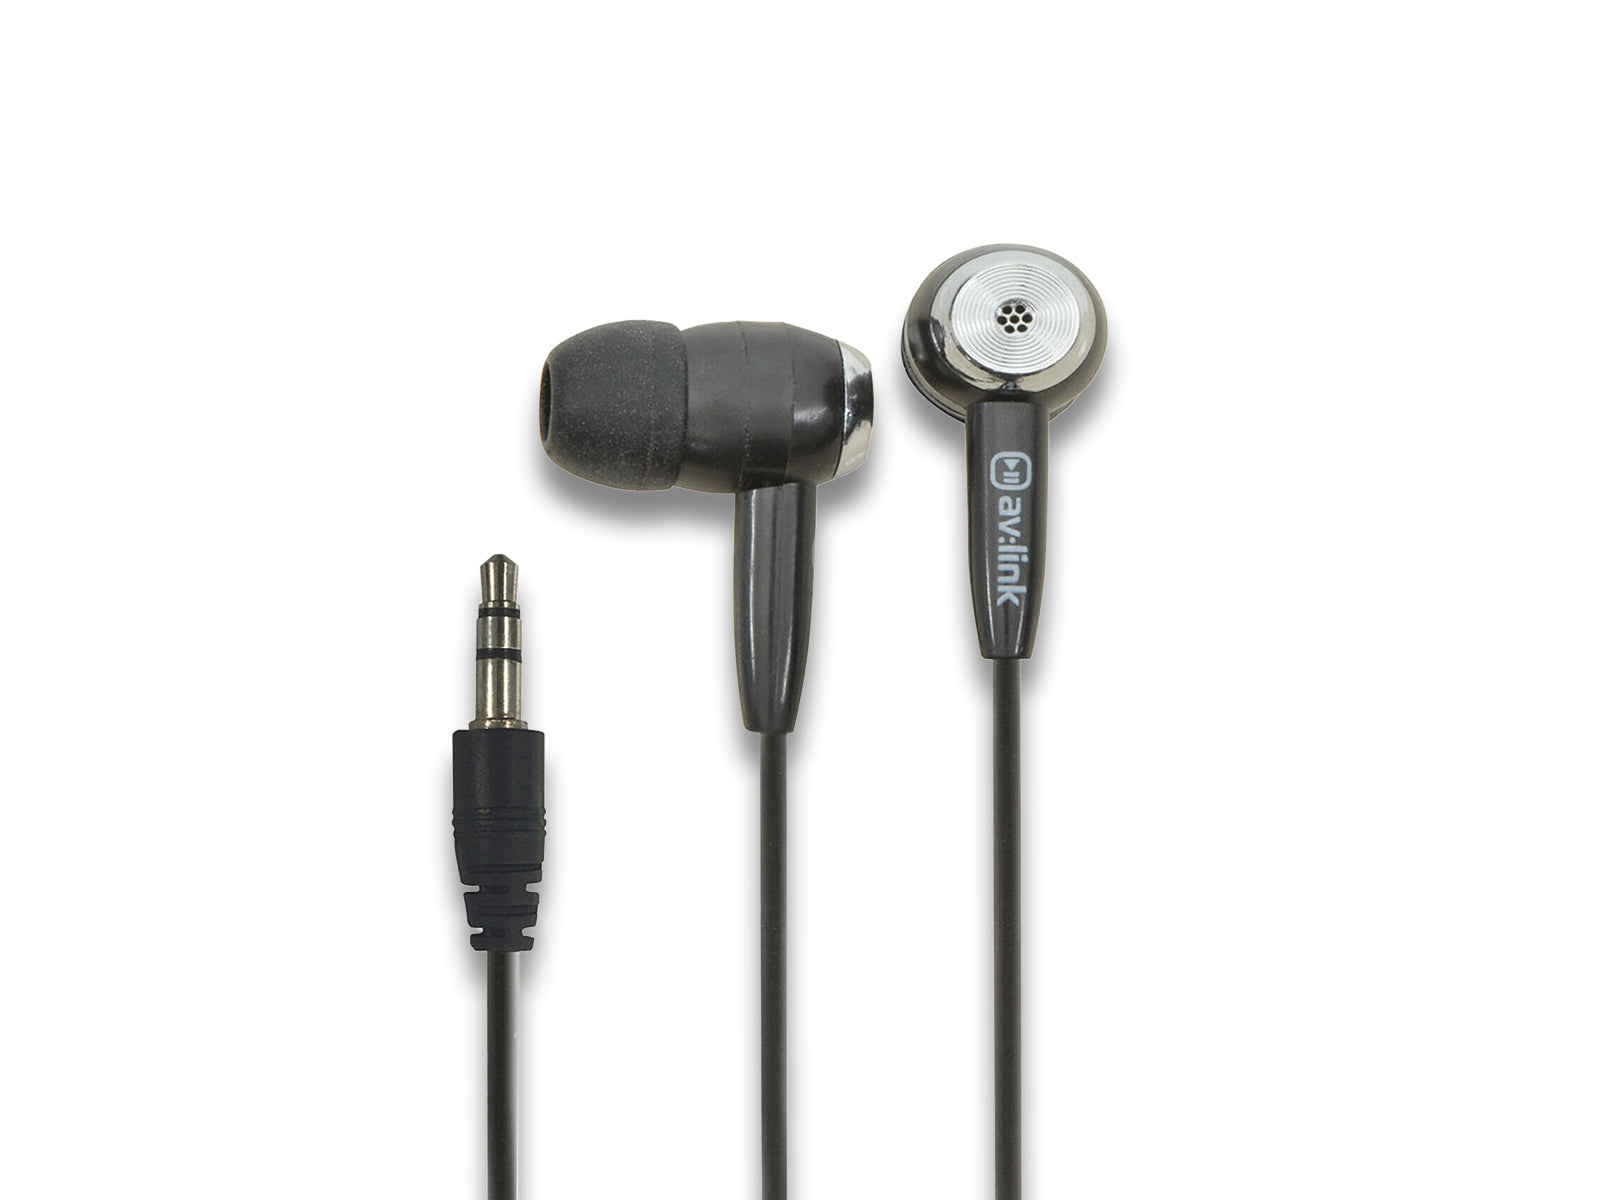 Ear Buds With 3.5mm Stereo Jack Showing the Aux Cable